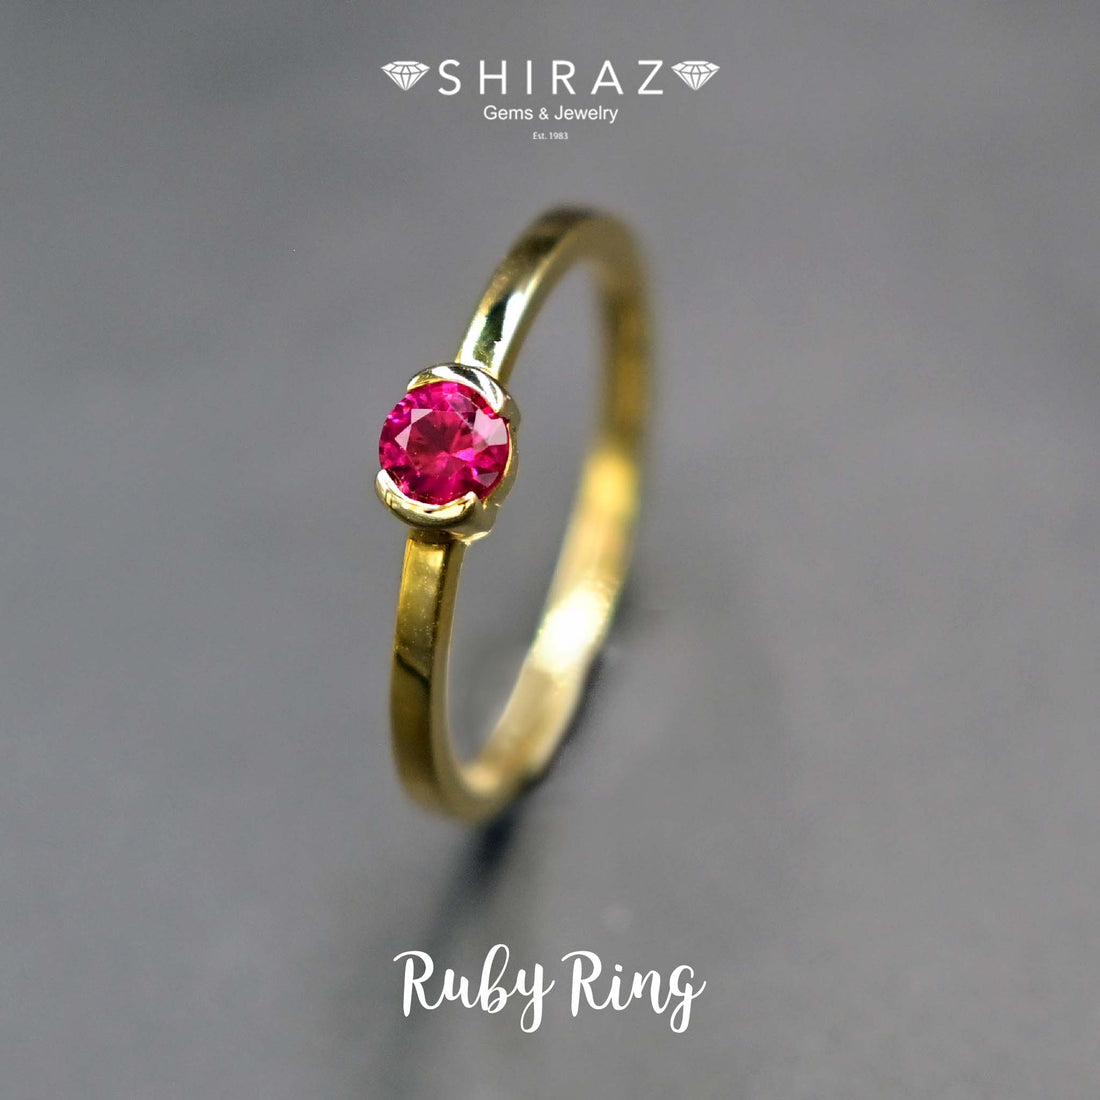 Pretty handmade ruby ring in 18k gold setting from Chiang Mai, Thailand